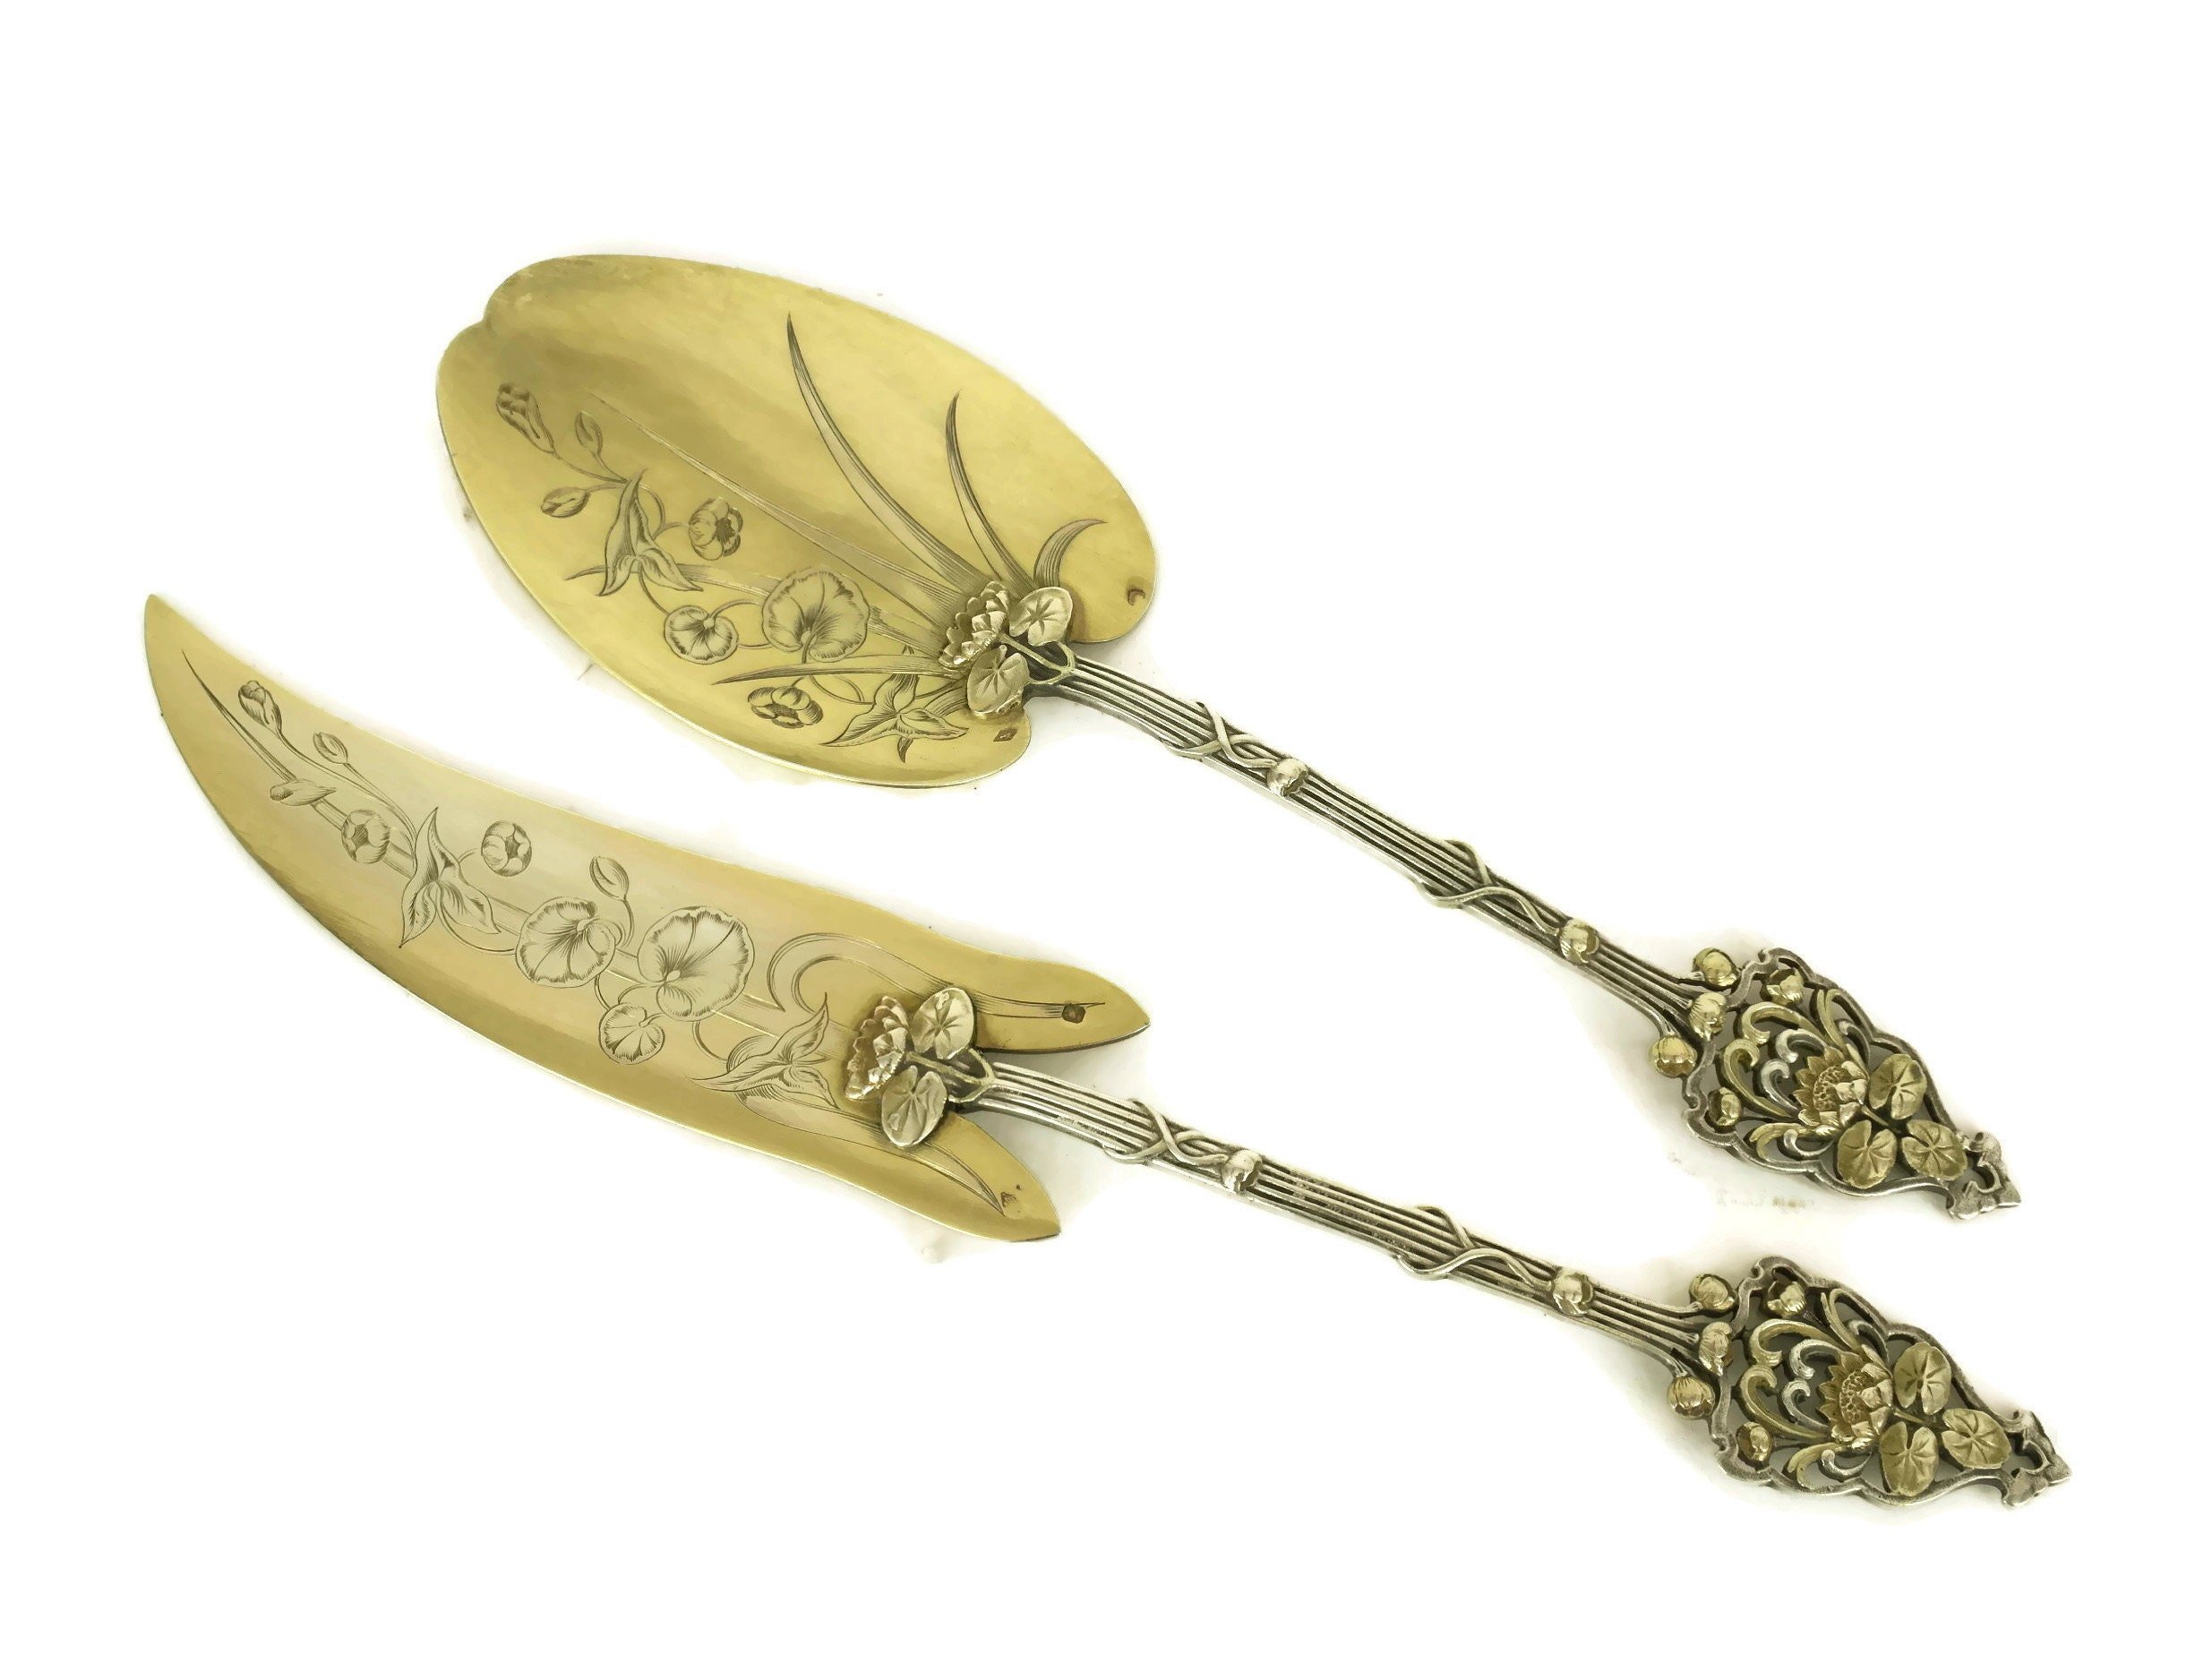 Antique Sterling Silver Cake Server Set with French Art ...